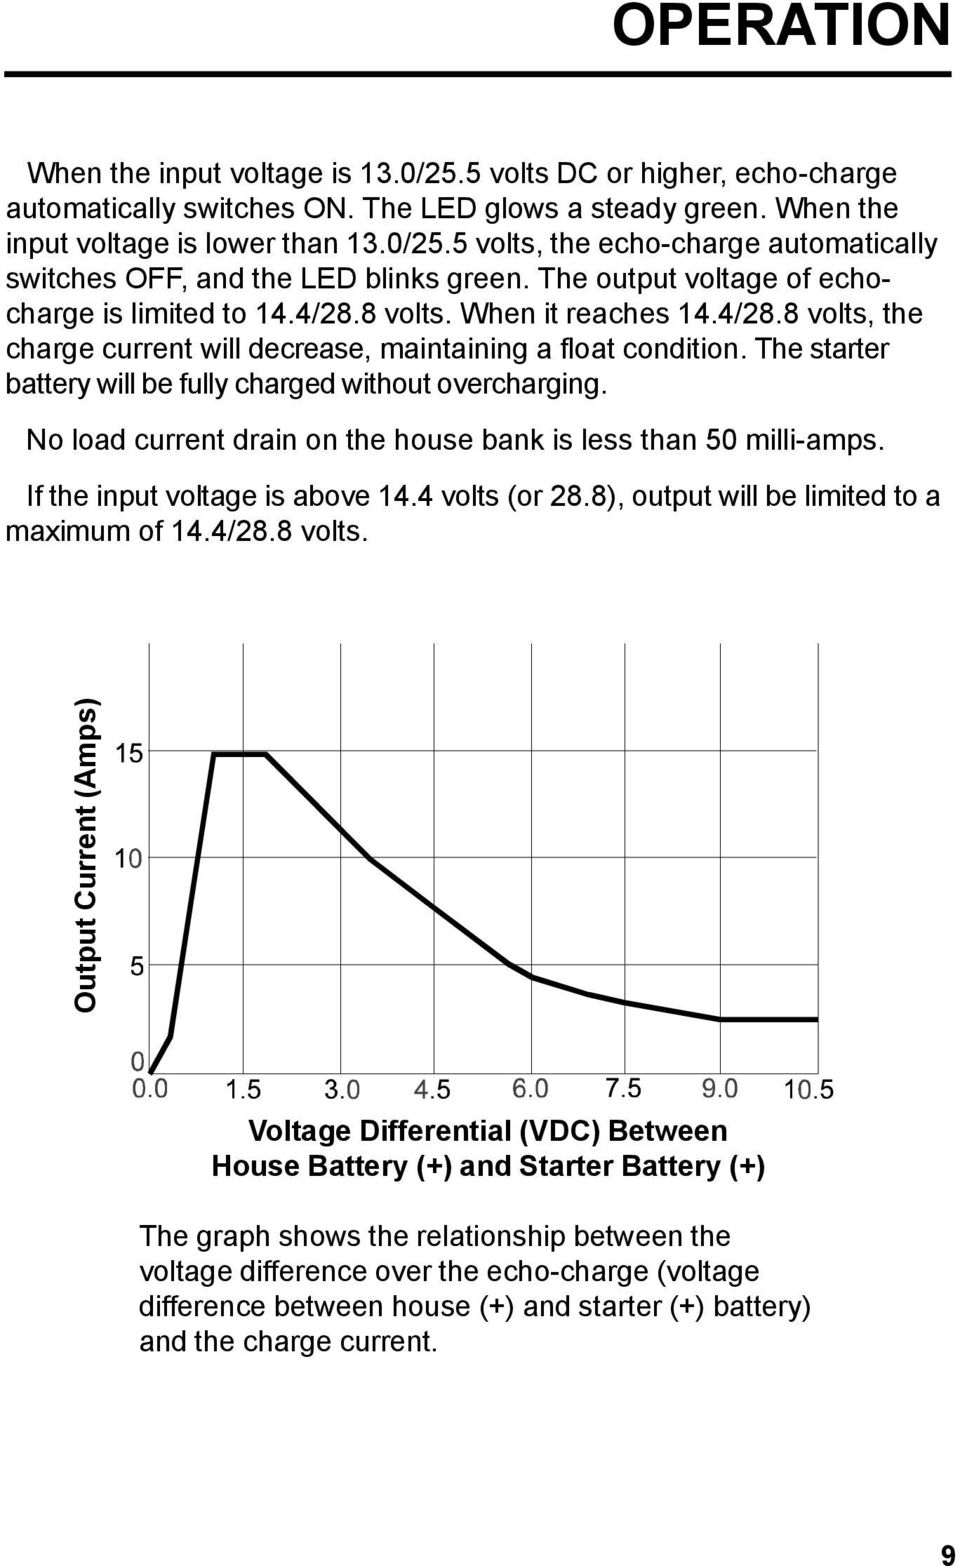 The starter battery will be fully charged without overcharging. No load current drain on the house bank is less than 50 milli-amps. If the input voltage is above 14.4 volts (or 28.